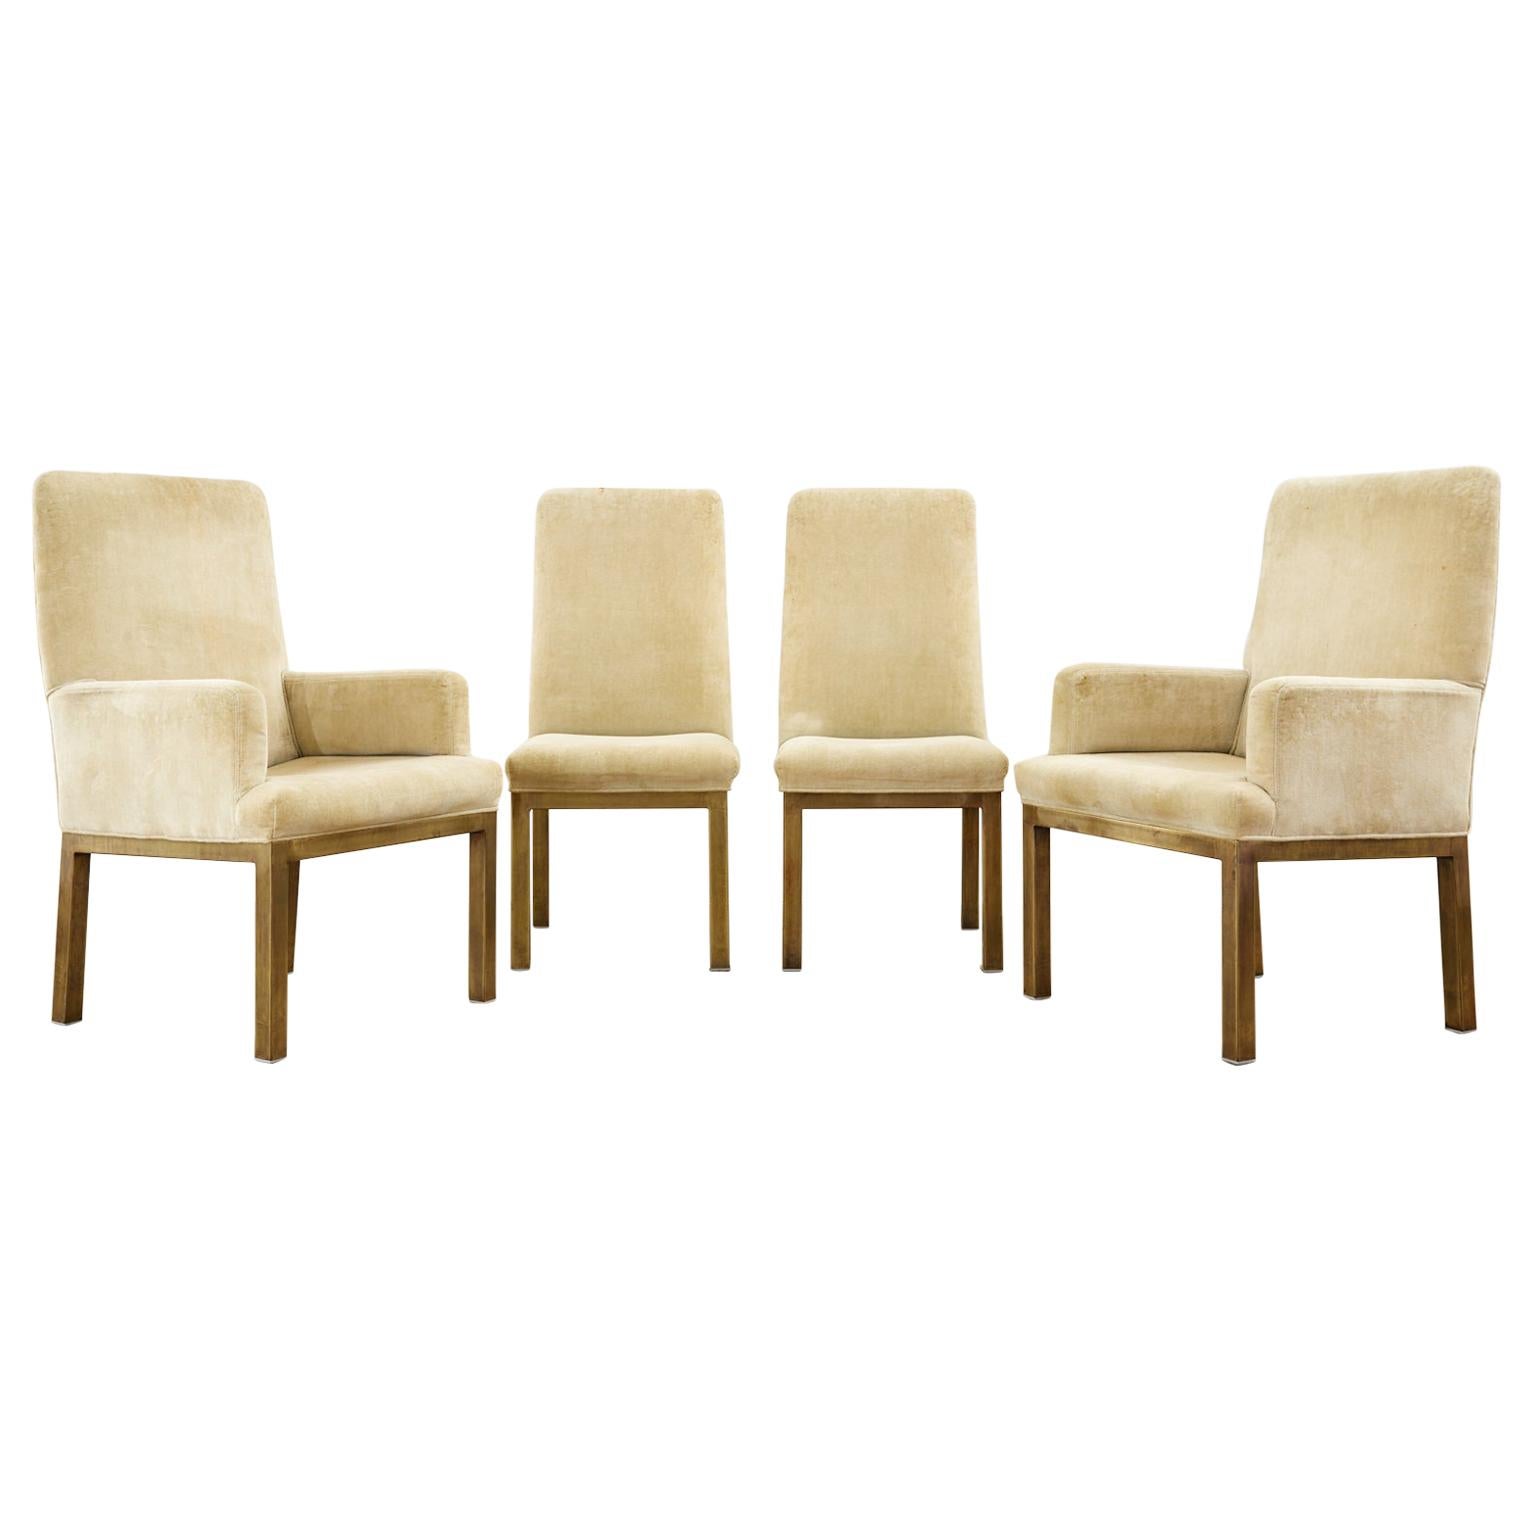 Set of Four Midcentury Bronzed Dining Chairs by Mastercraft